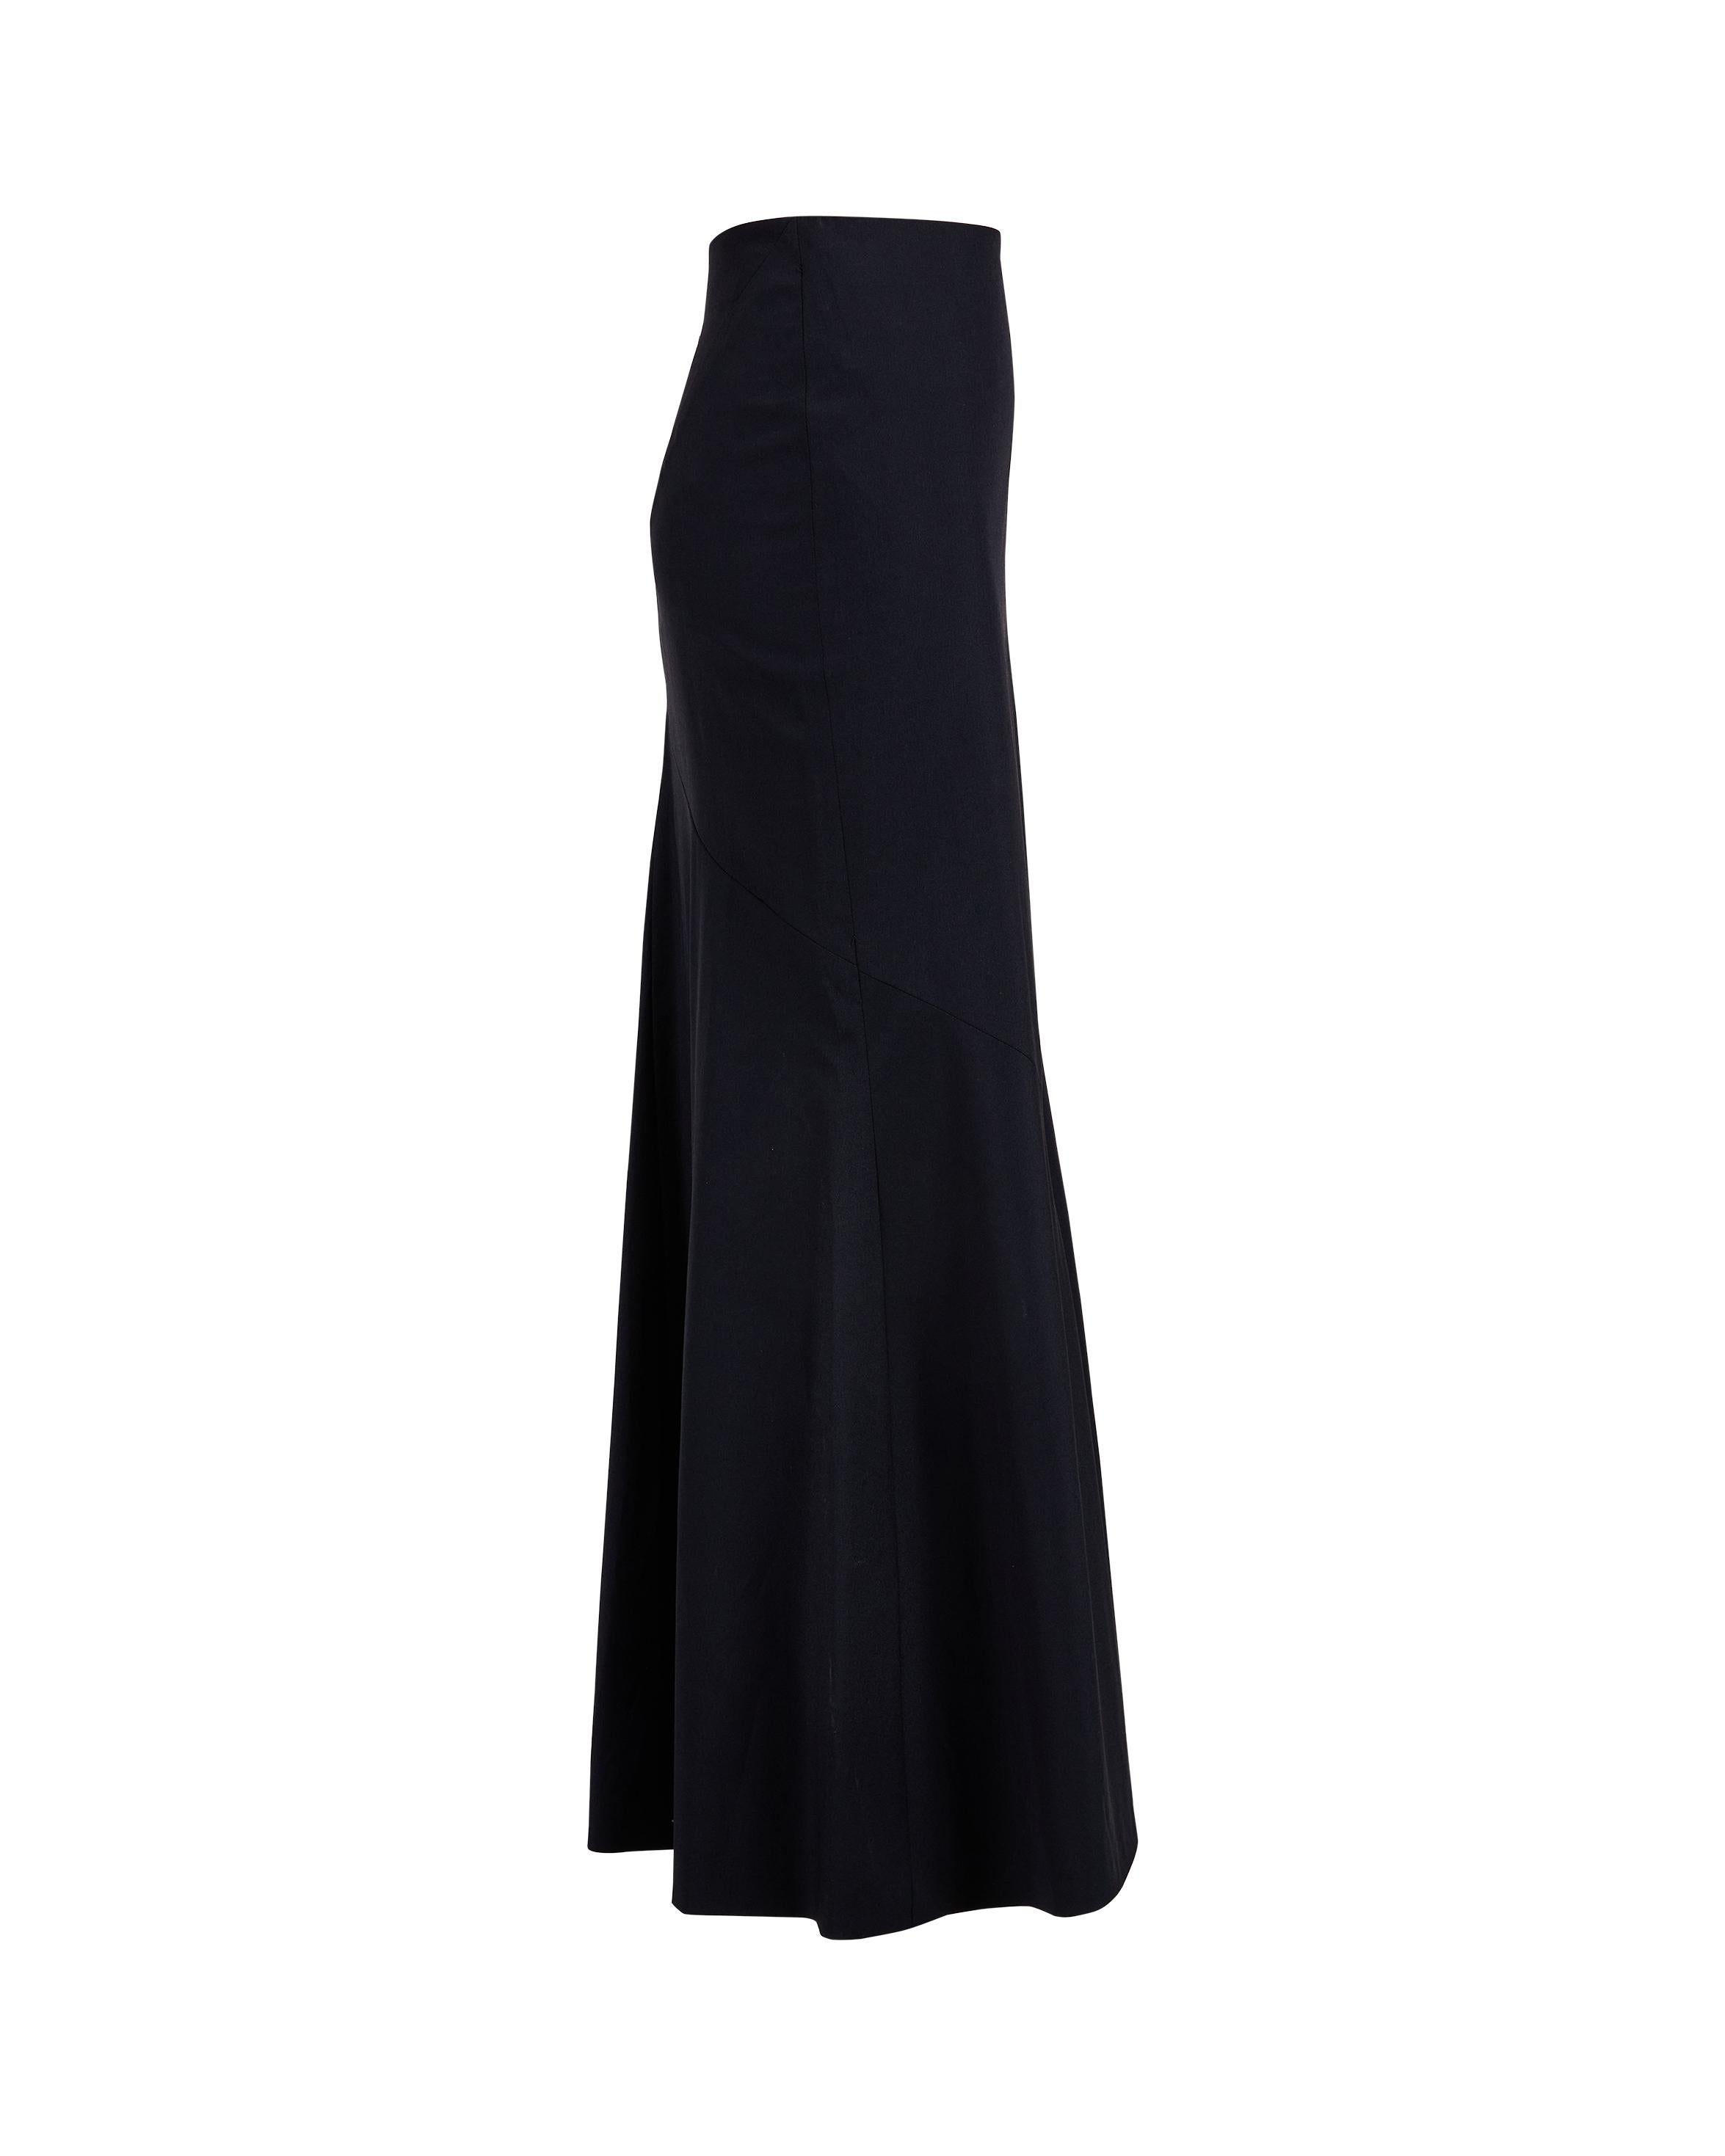 1990's Jean Paul Gaultier black wool fishtail maxi skirt. Fitted skirt with fishtail flare hem and side zip closure. Features two back holes for belt. In excellent vintage condition with no flaws to note.